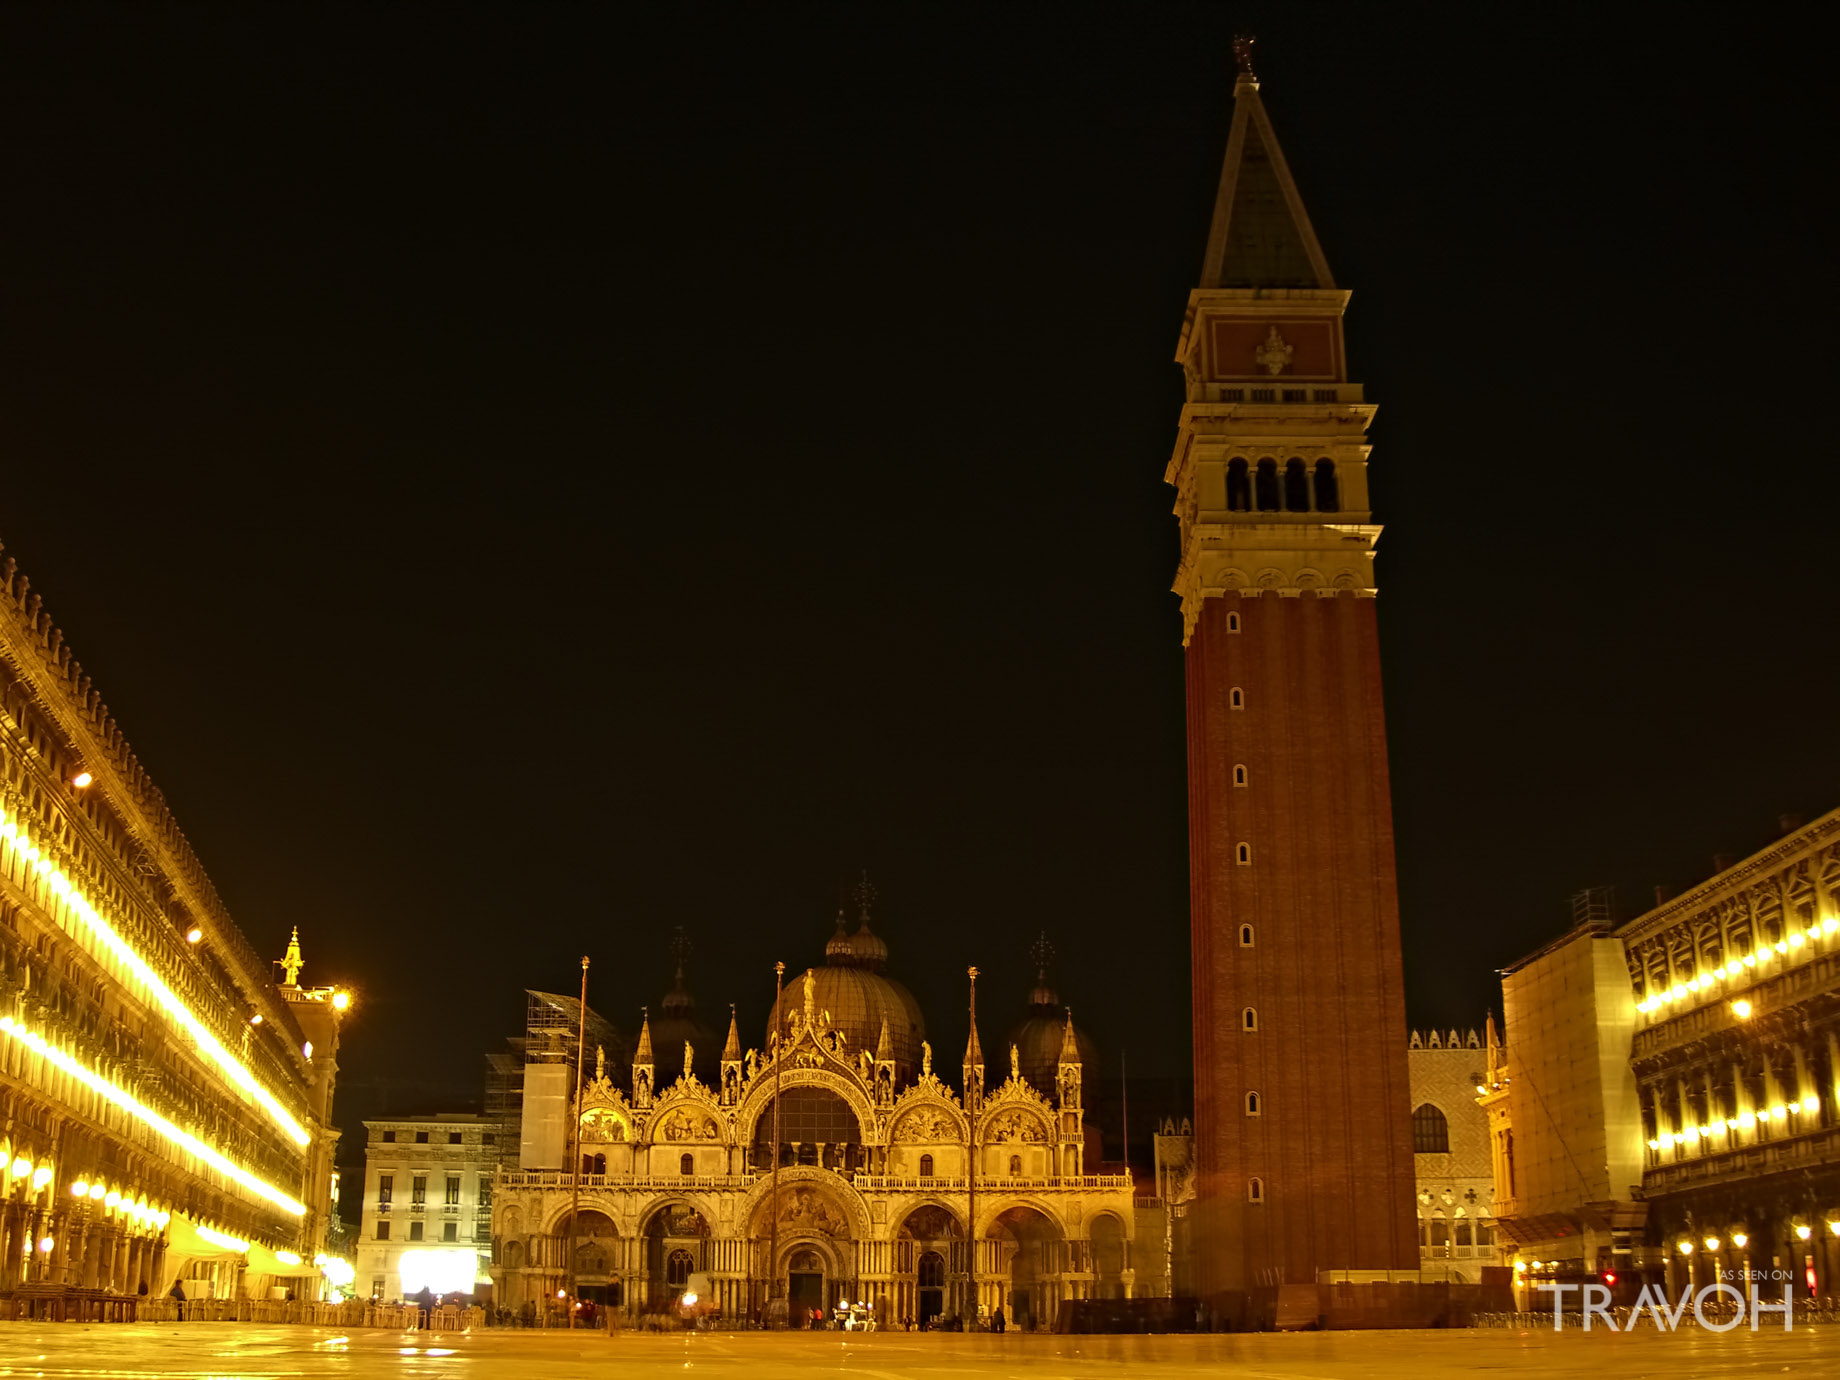 Visit the Piazza San Marco - Venice, Italy